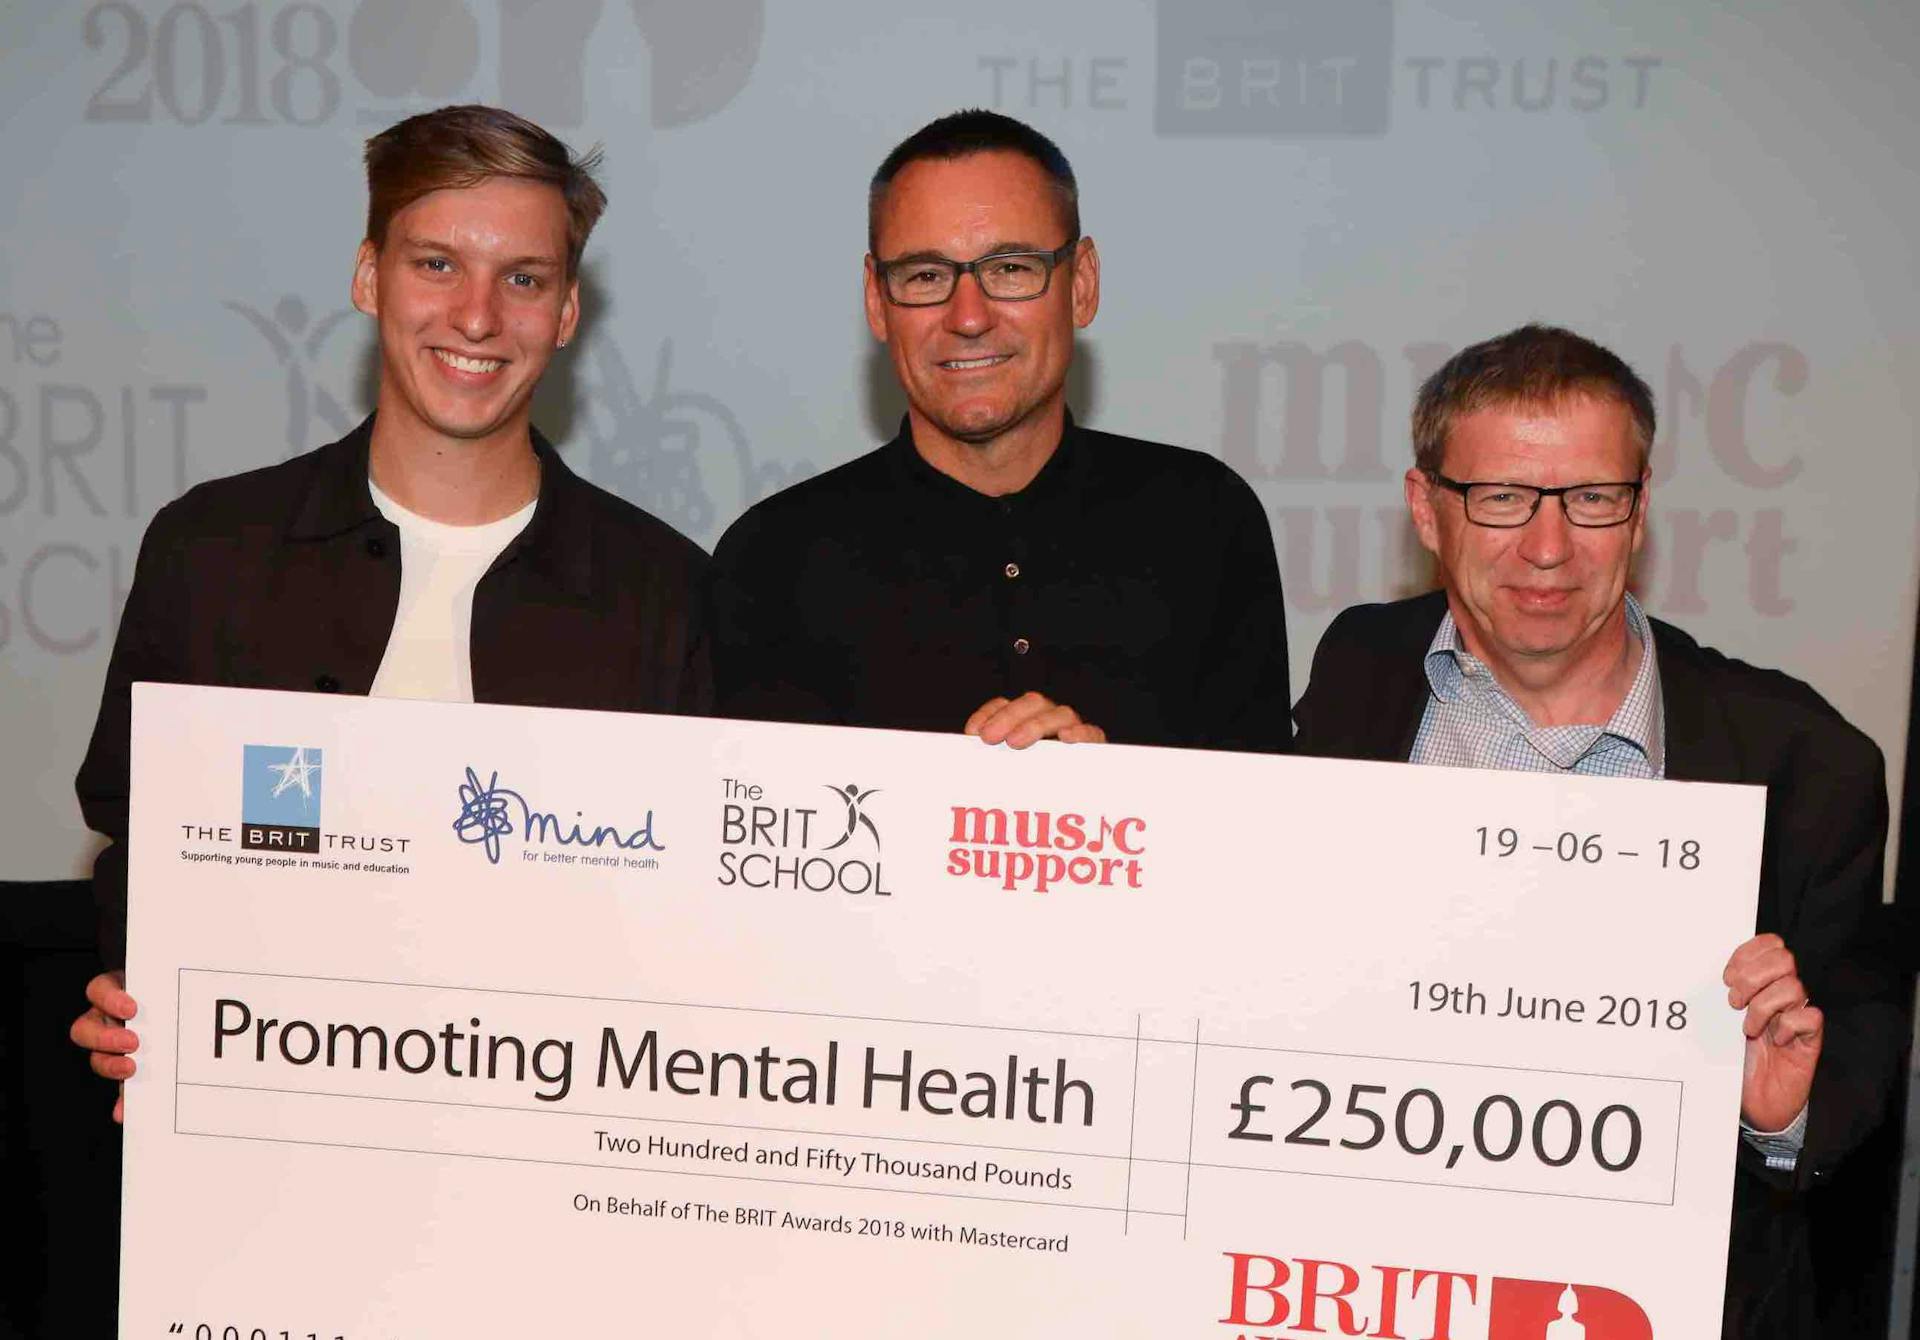 BRIT Awards Donates £250,000 to Mind, BRIT School and Music Support to Fund Mental Health Education